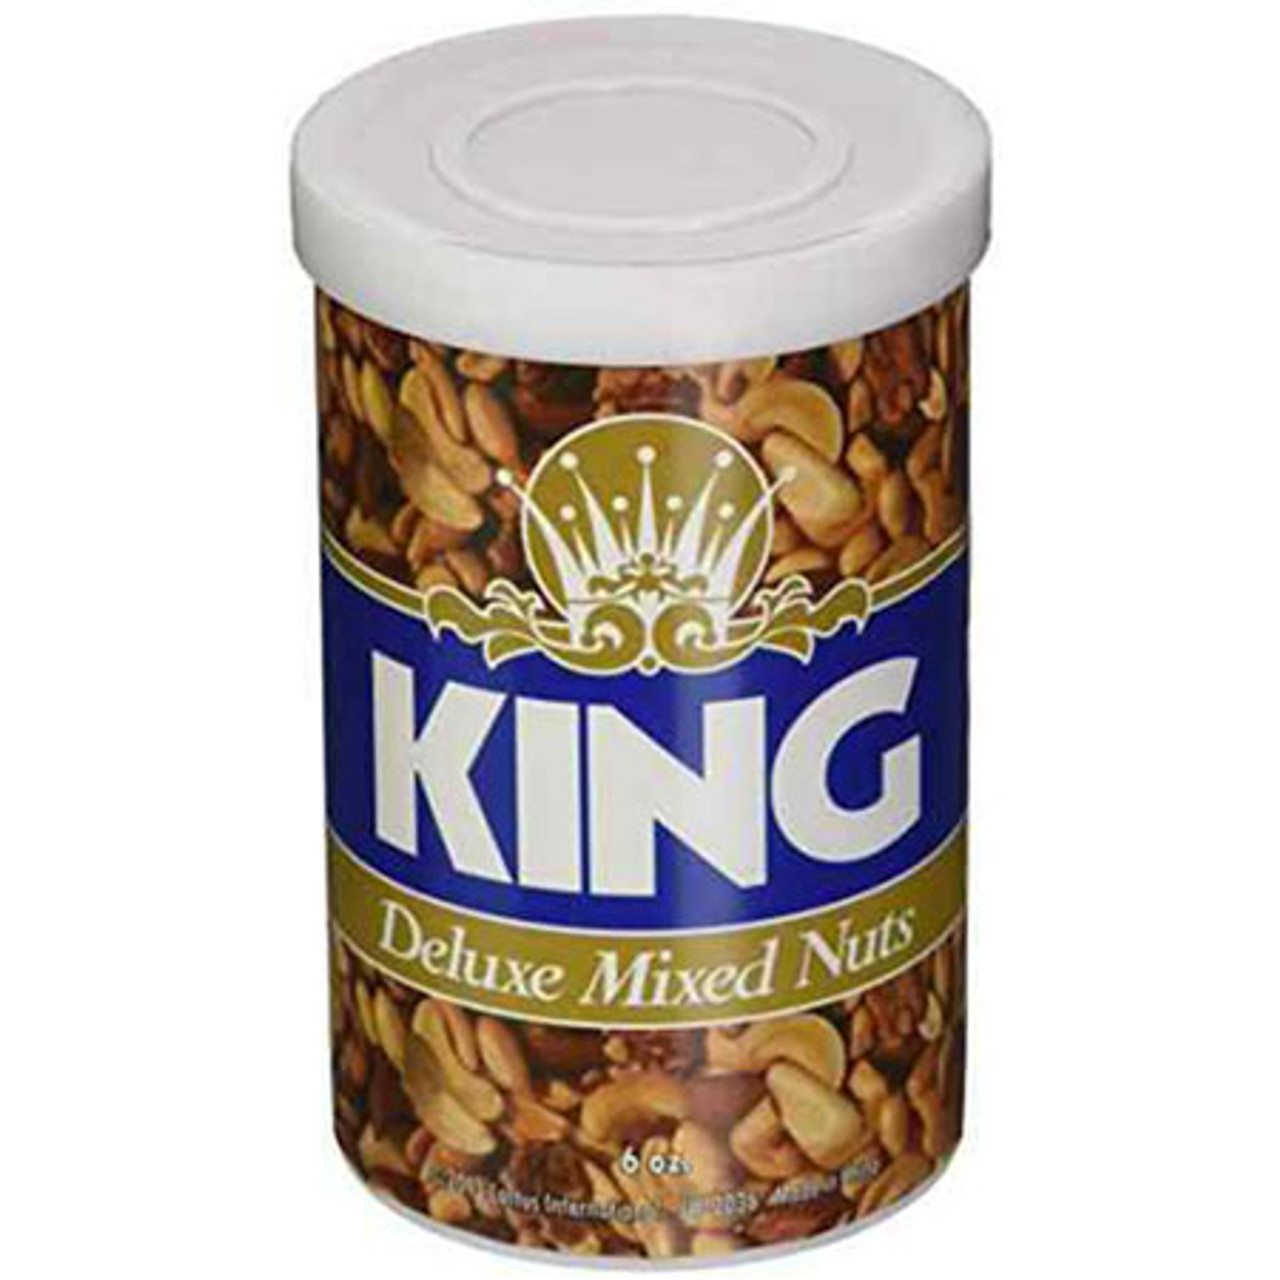 King Nut Can Deluxe Magic Trick Funny Gag Sring Snake